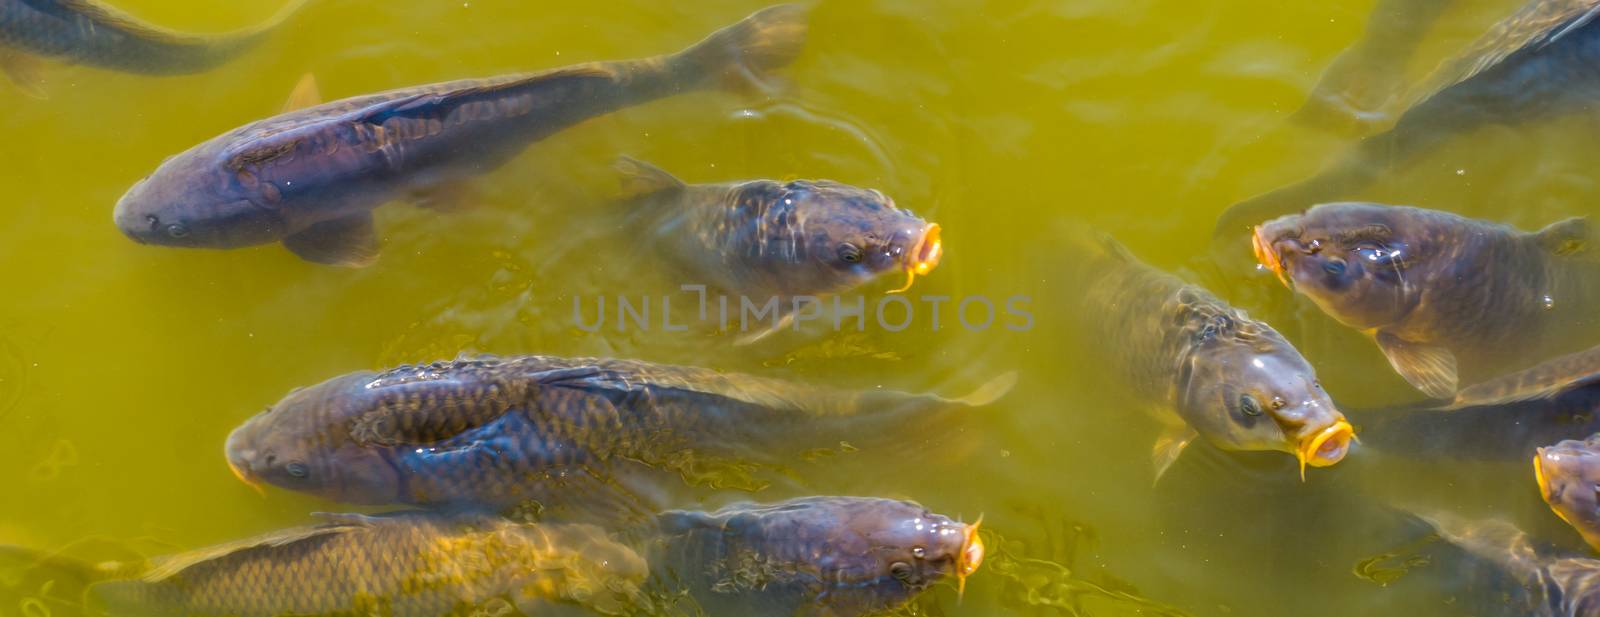 closeup of common carps swimming in the water, hungry fishes coming with their mouths above the water, popular fish specie from Europe by charlottebleijenberg